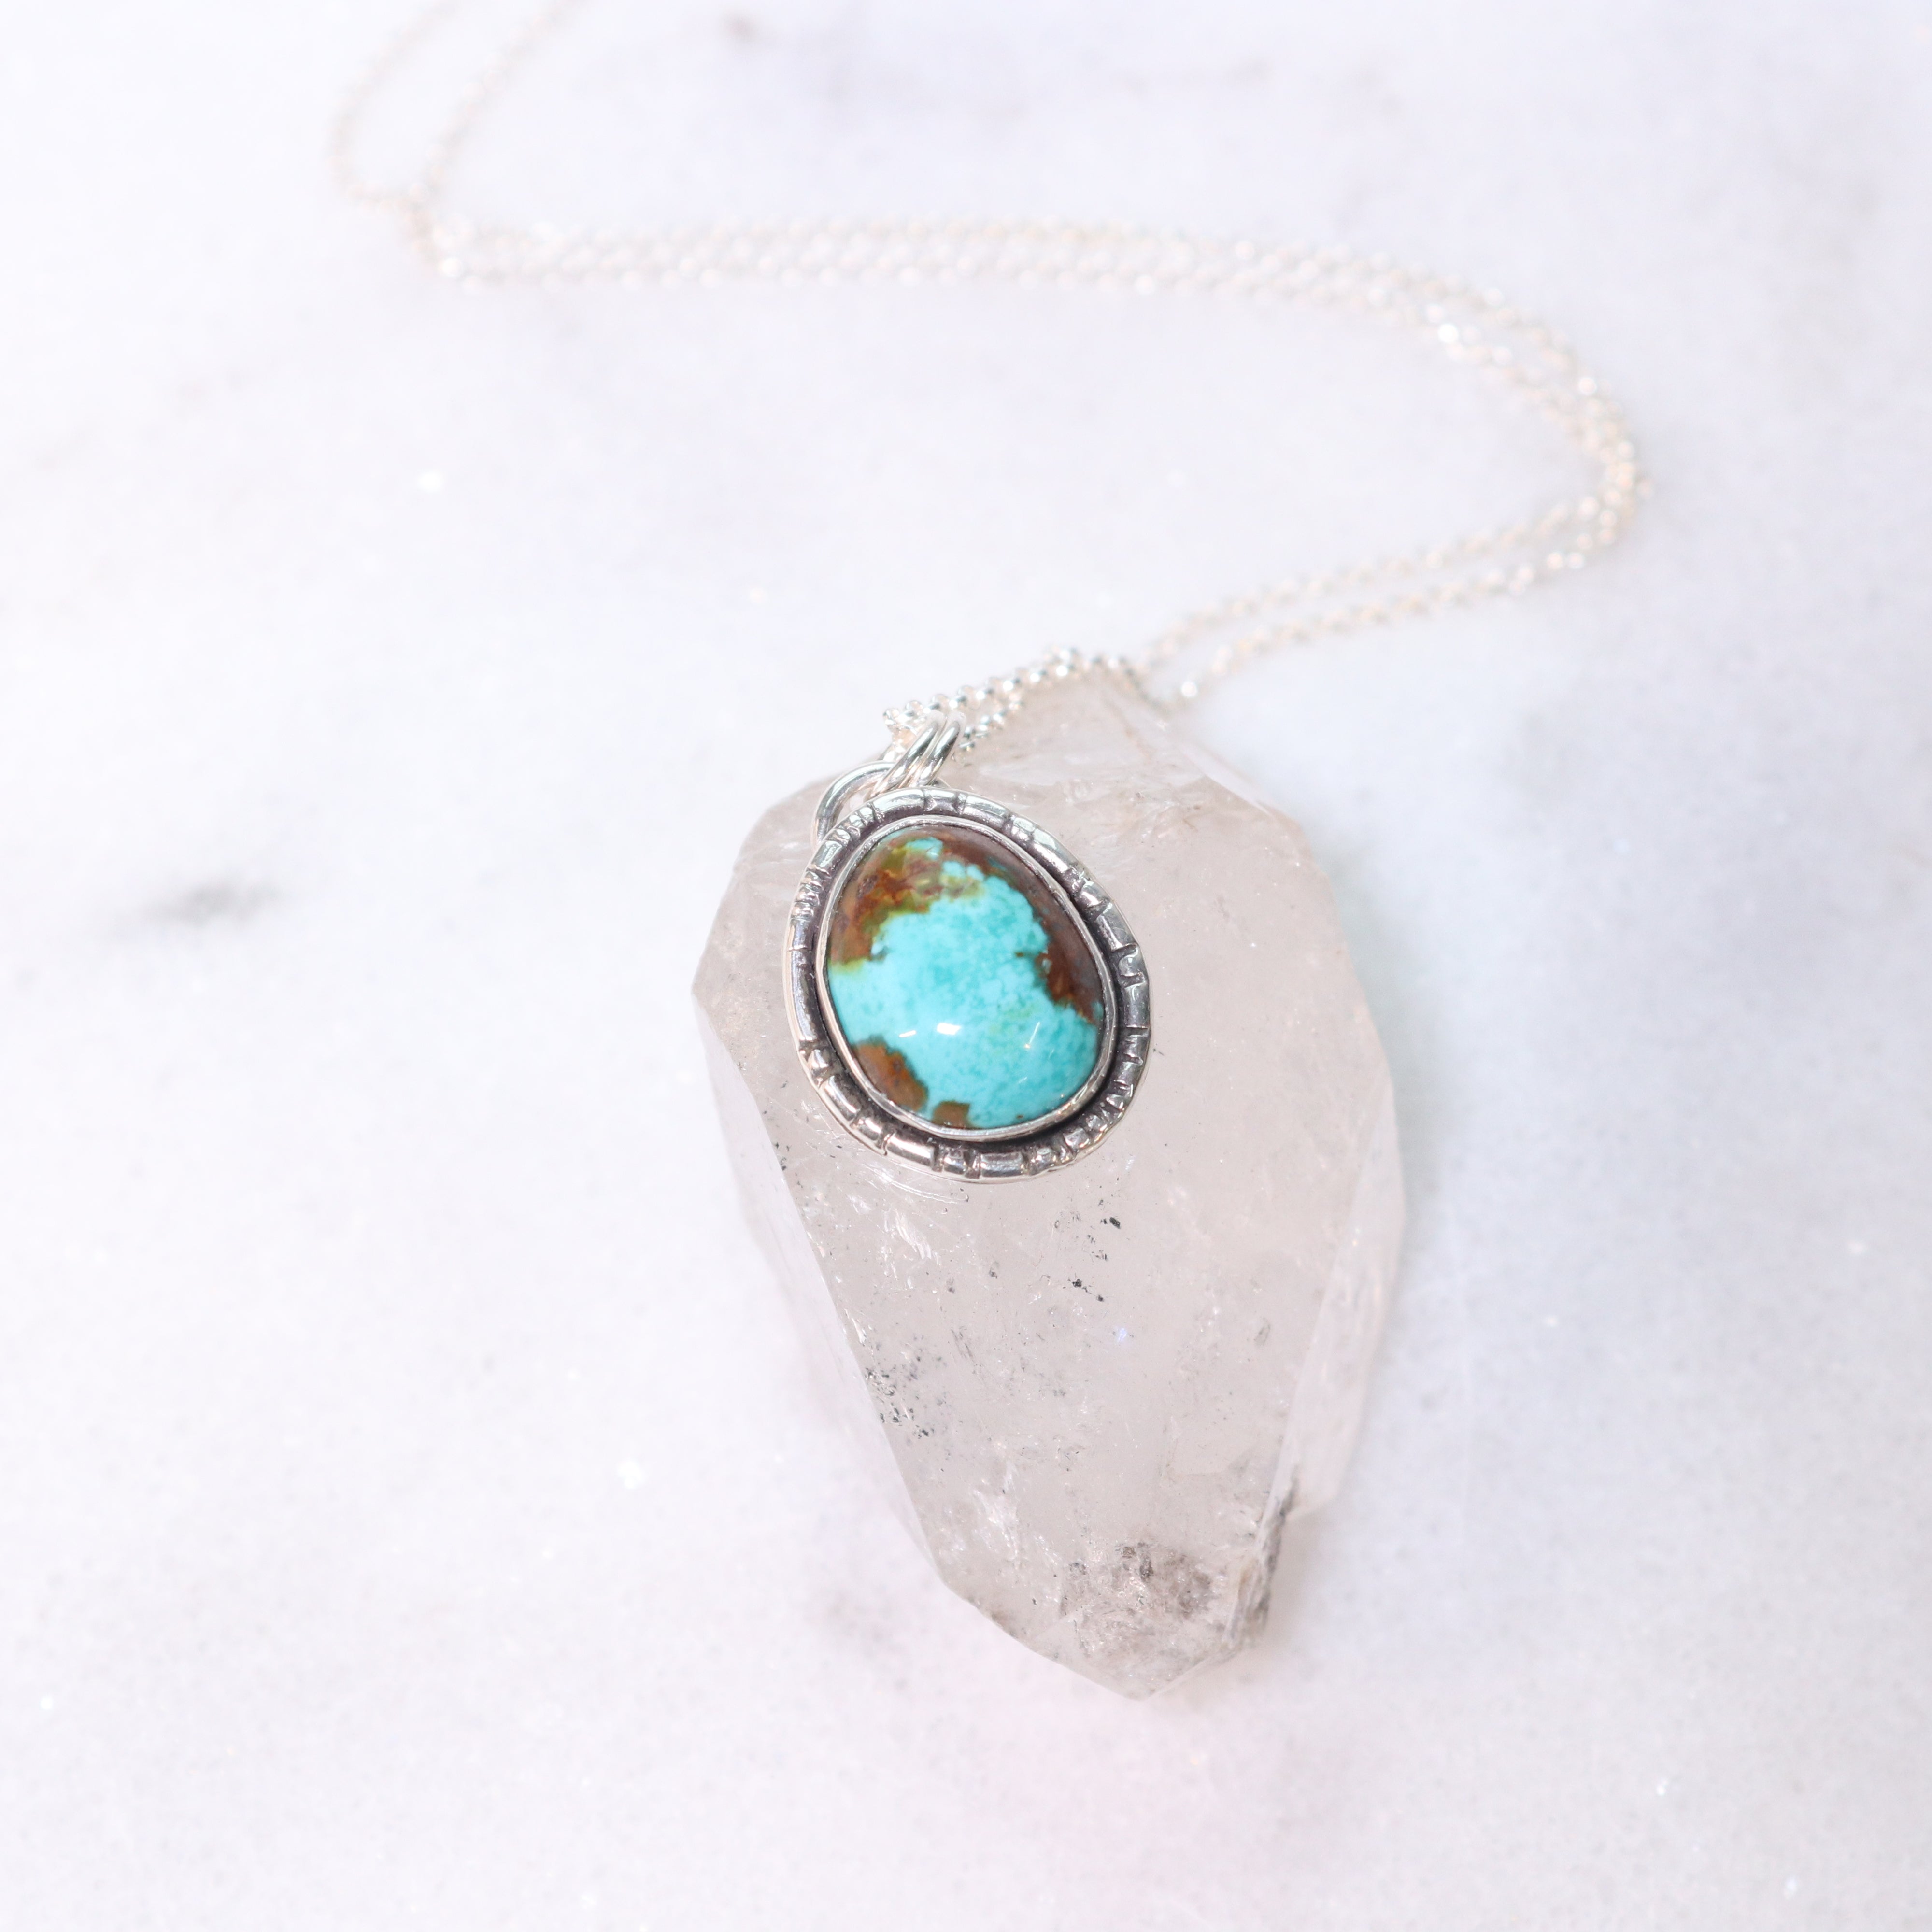 Sierra Nevada Turquoise Necklace